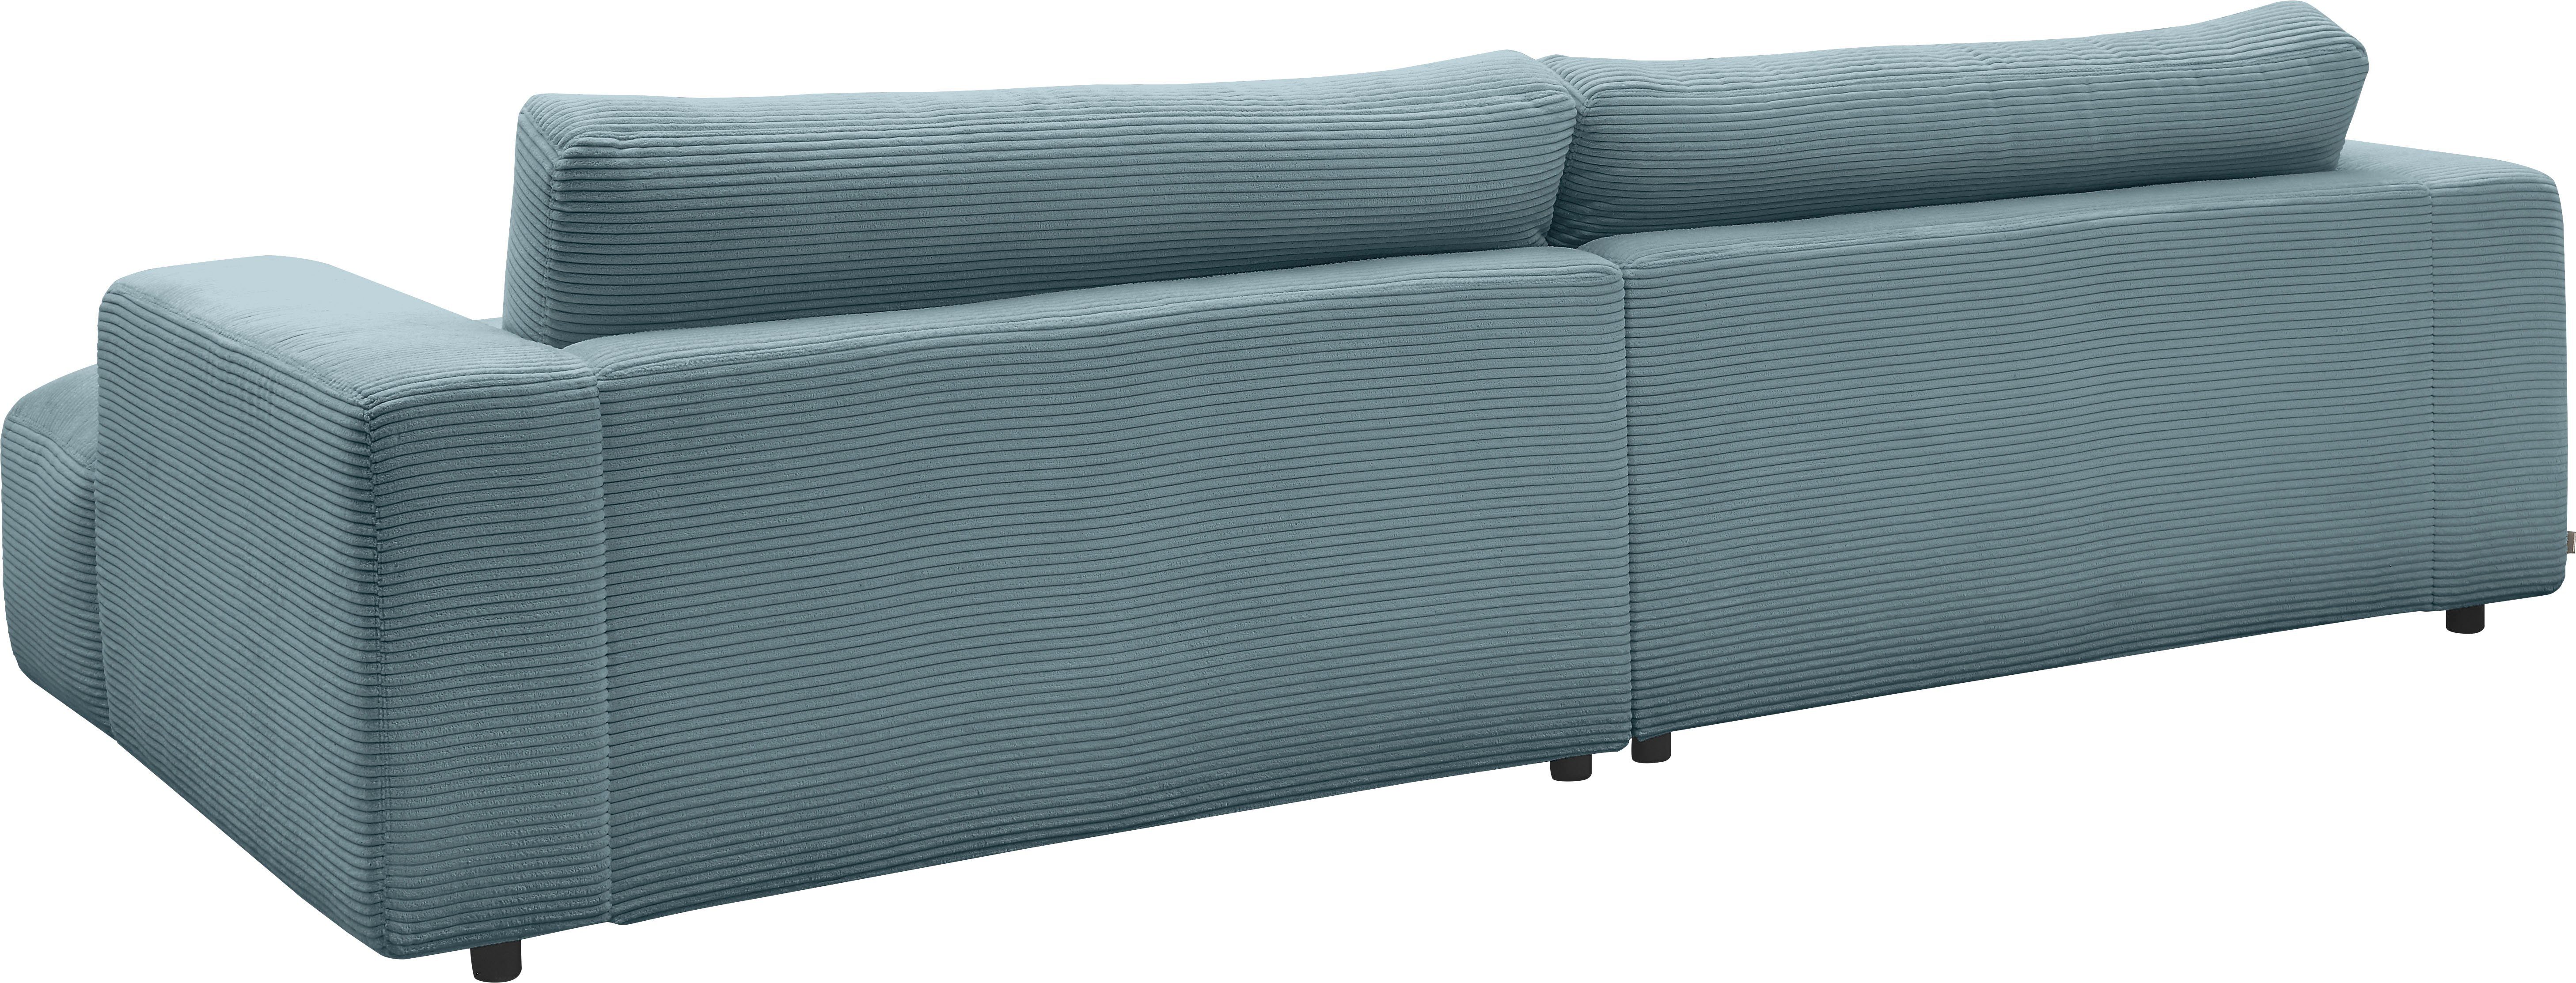 Breite Musterring Lucia, Cord-Bezug, Loungesofa branded GALLERY cm 292 M by petrol